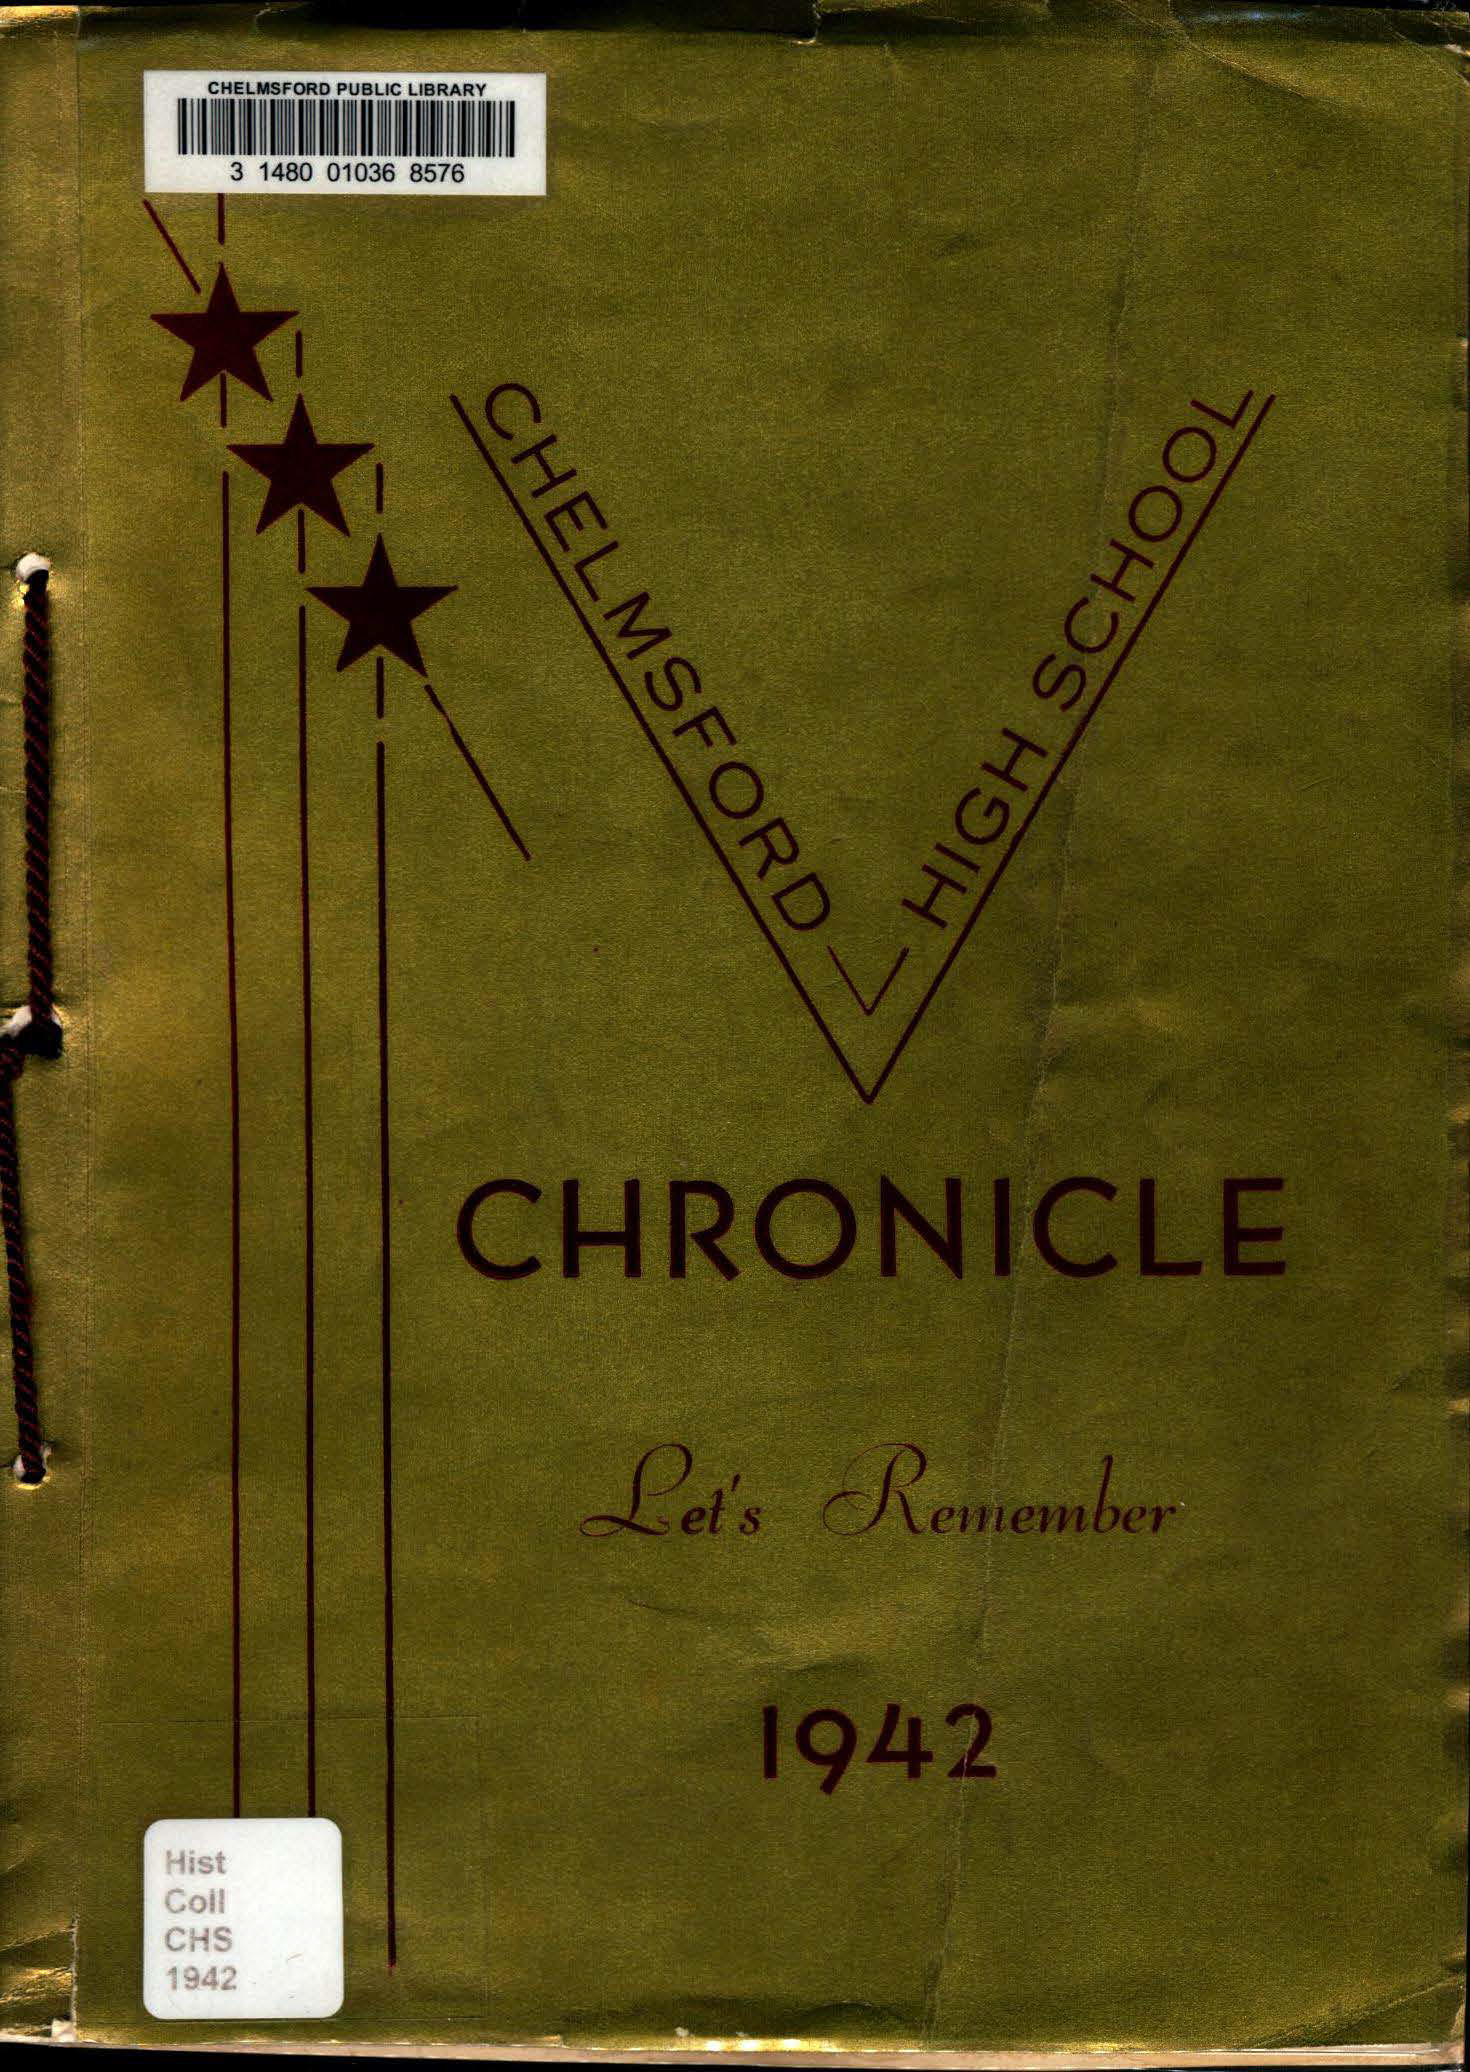 1942 Chelmsford High Yearbook 1